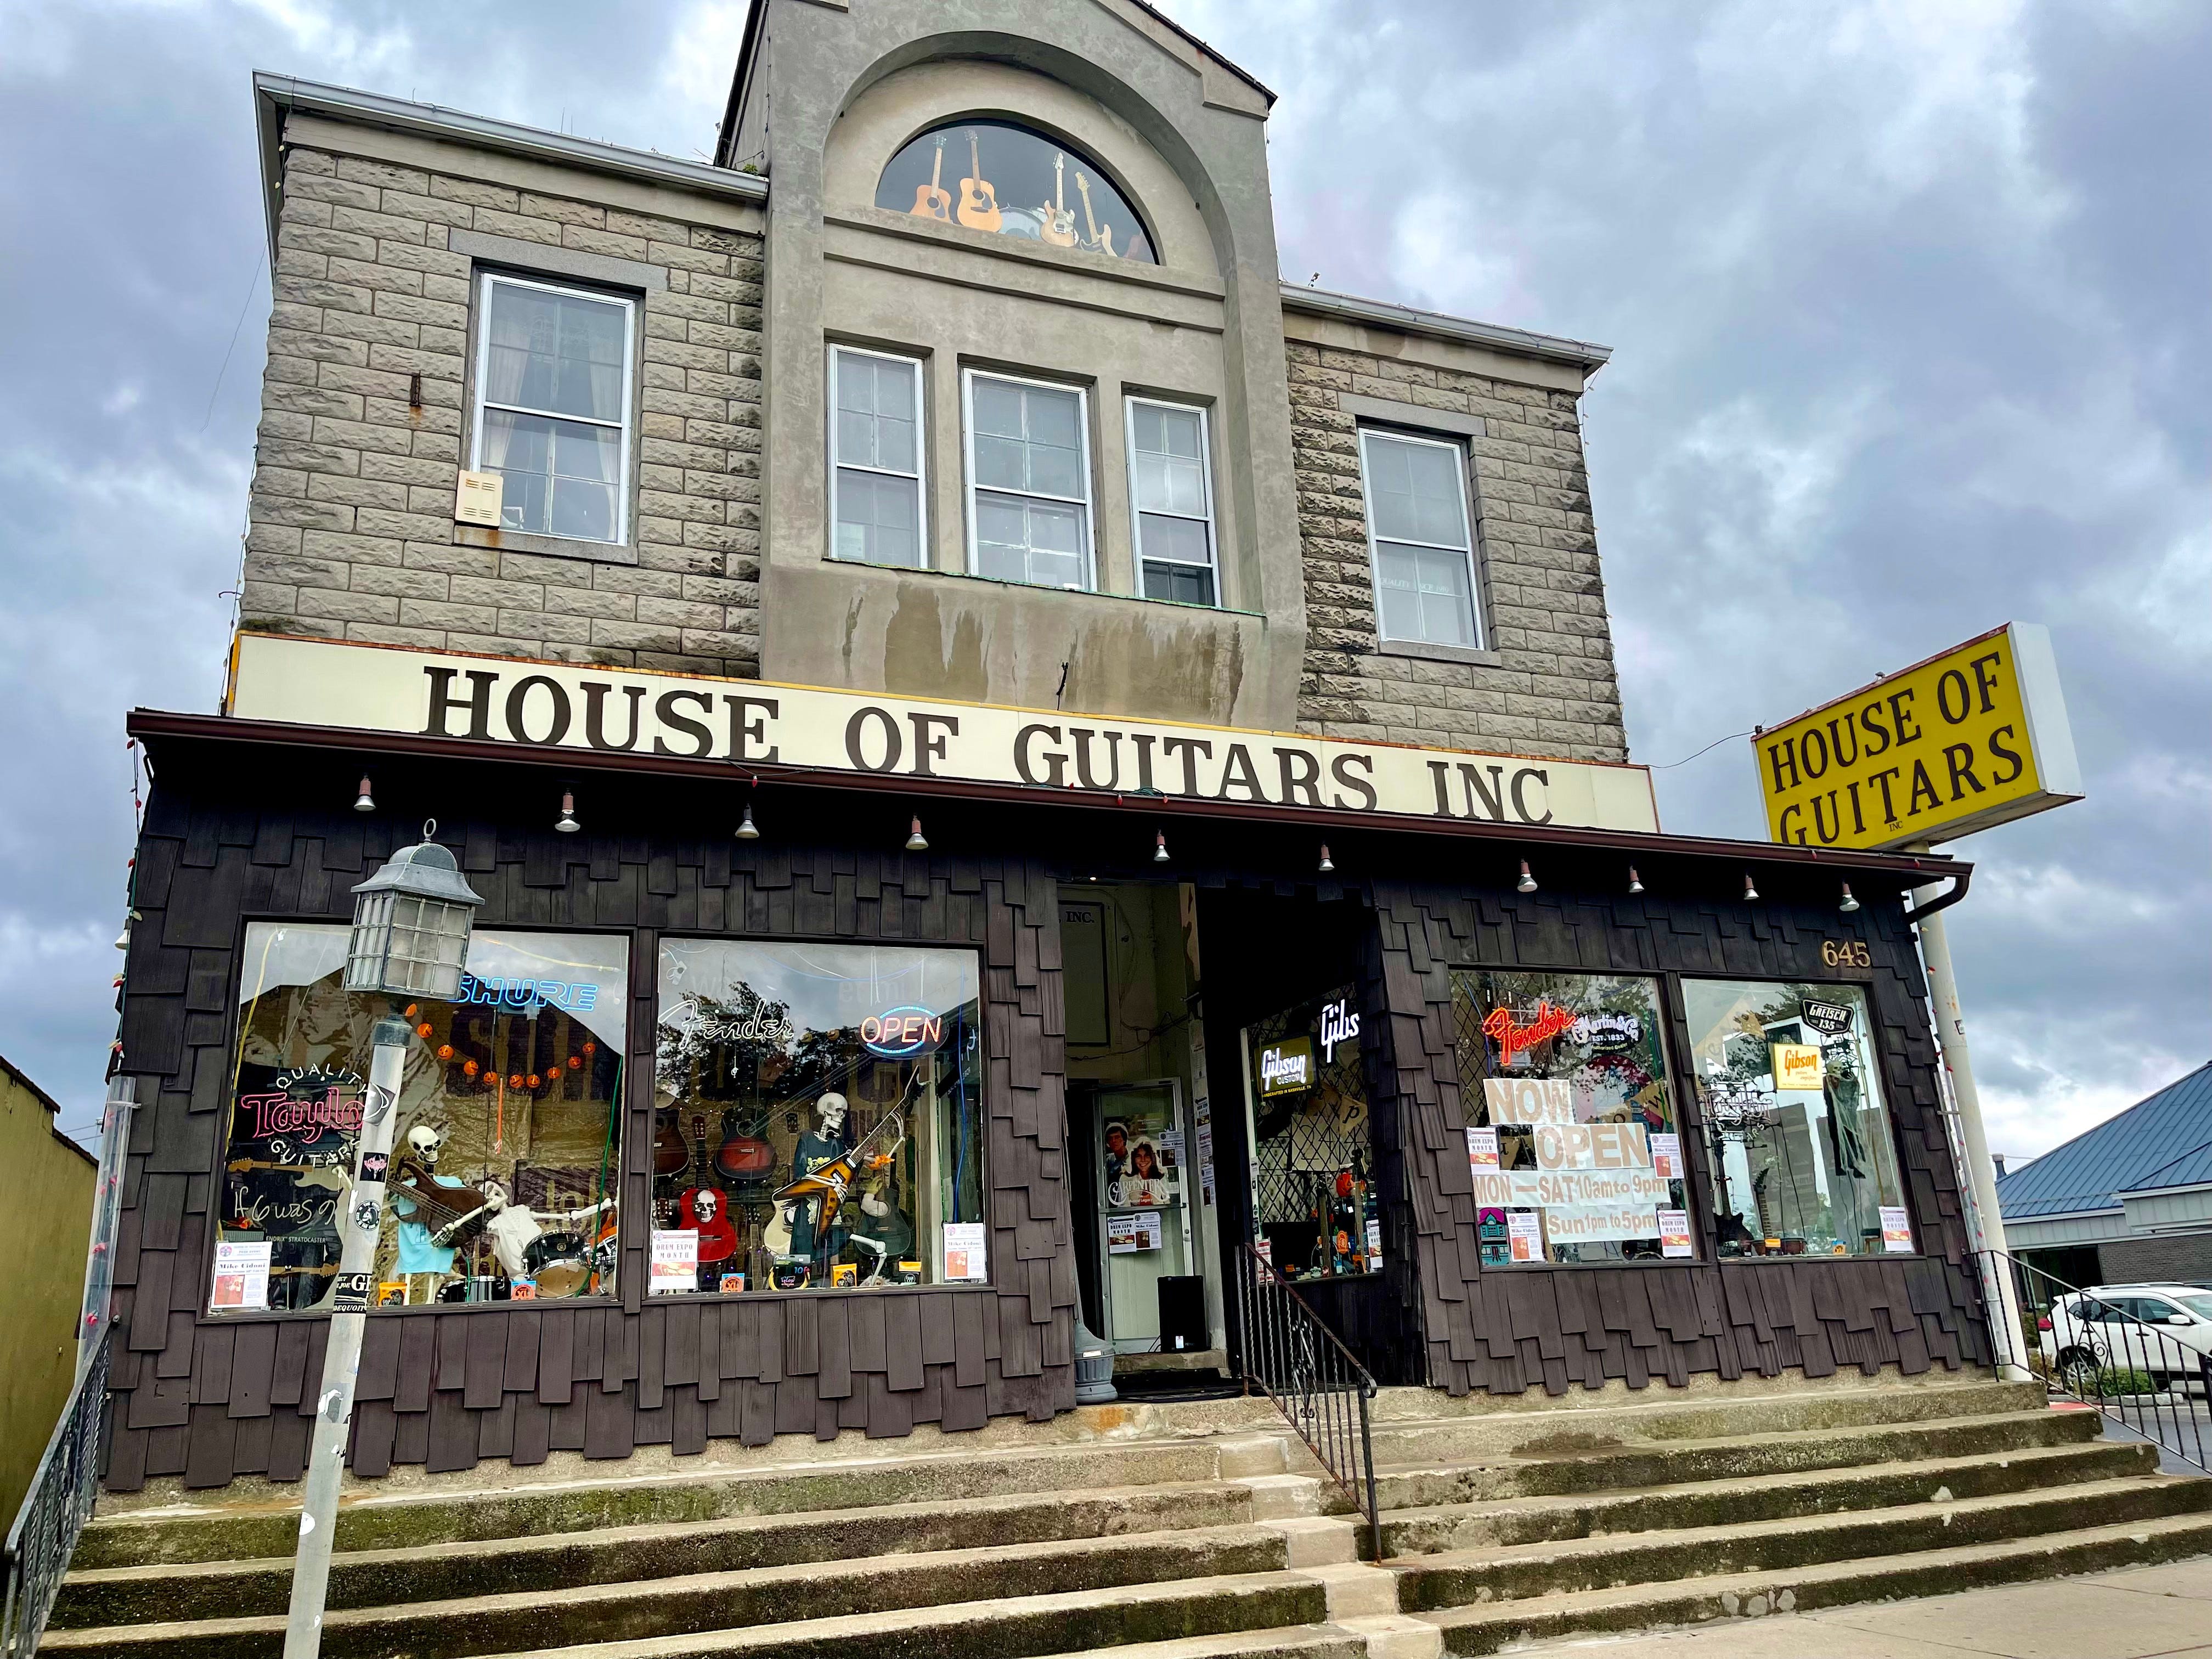 A view of the entrance to the top floor of House of Guitars from Titus Avenue.